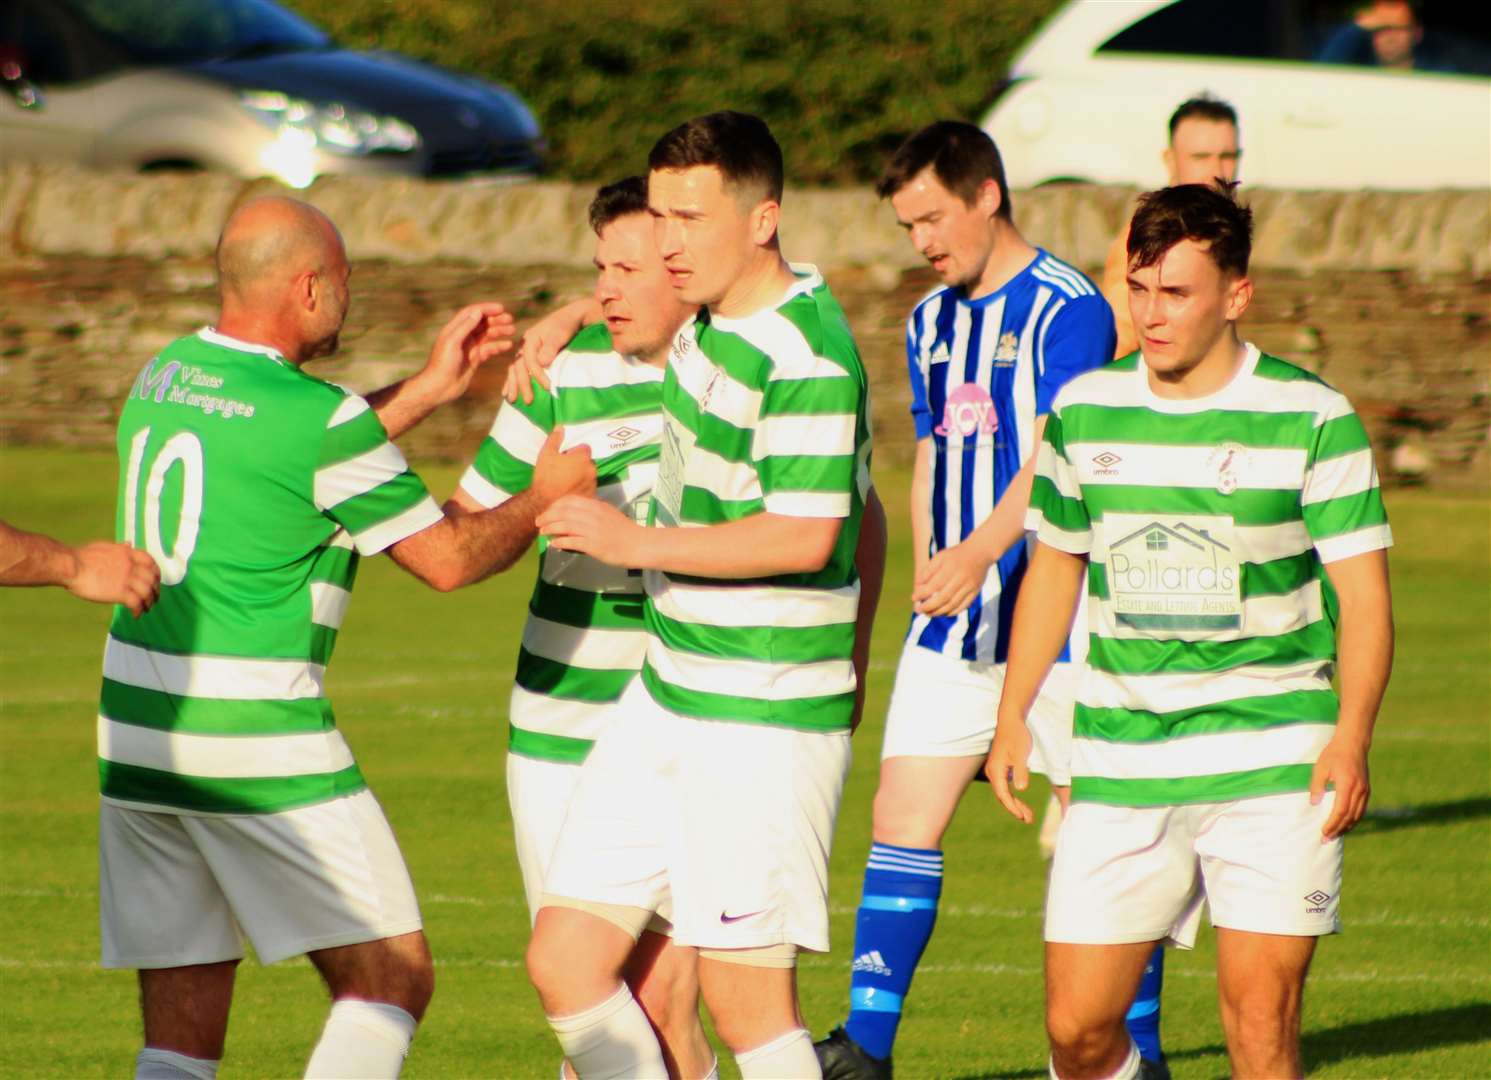 Castletown players celebrate after Michael Smith's first-half strike against Lybster in the David Allan Shield semi-final at Back Park on Wednesday night. It proved to be the only goal of the game.